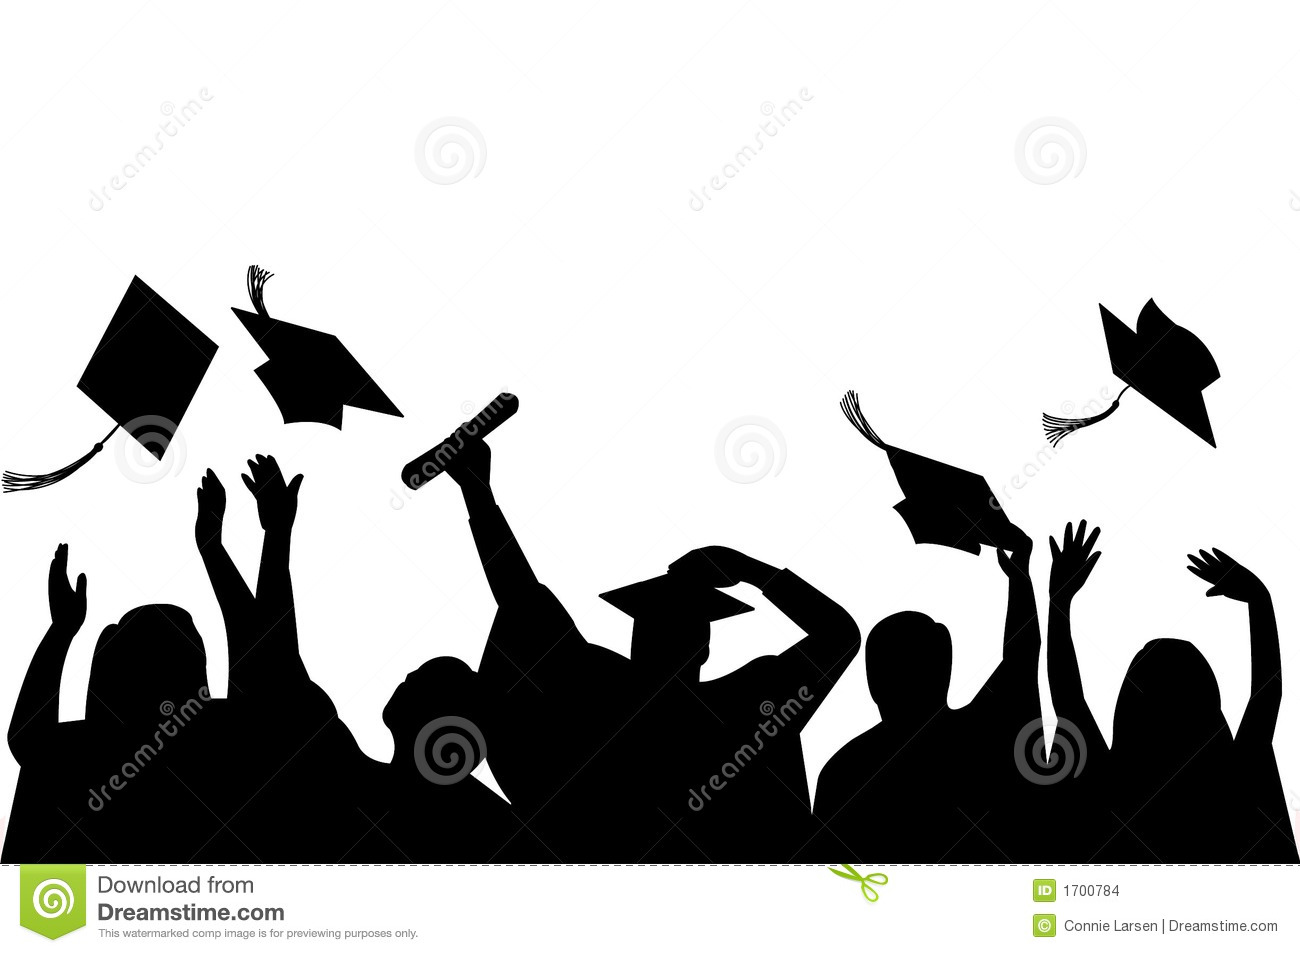 Illustration Of A Group Of Graduates Tossing Their Caps In Celebration